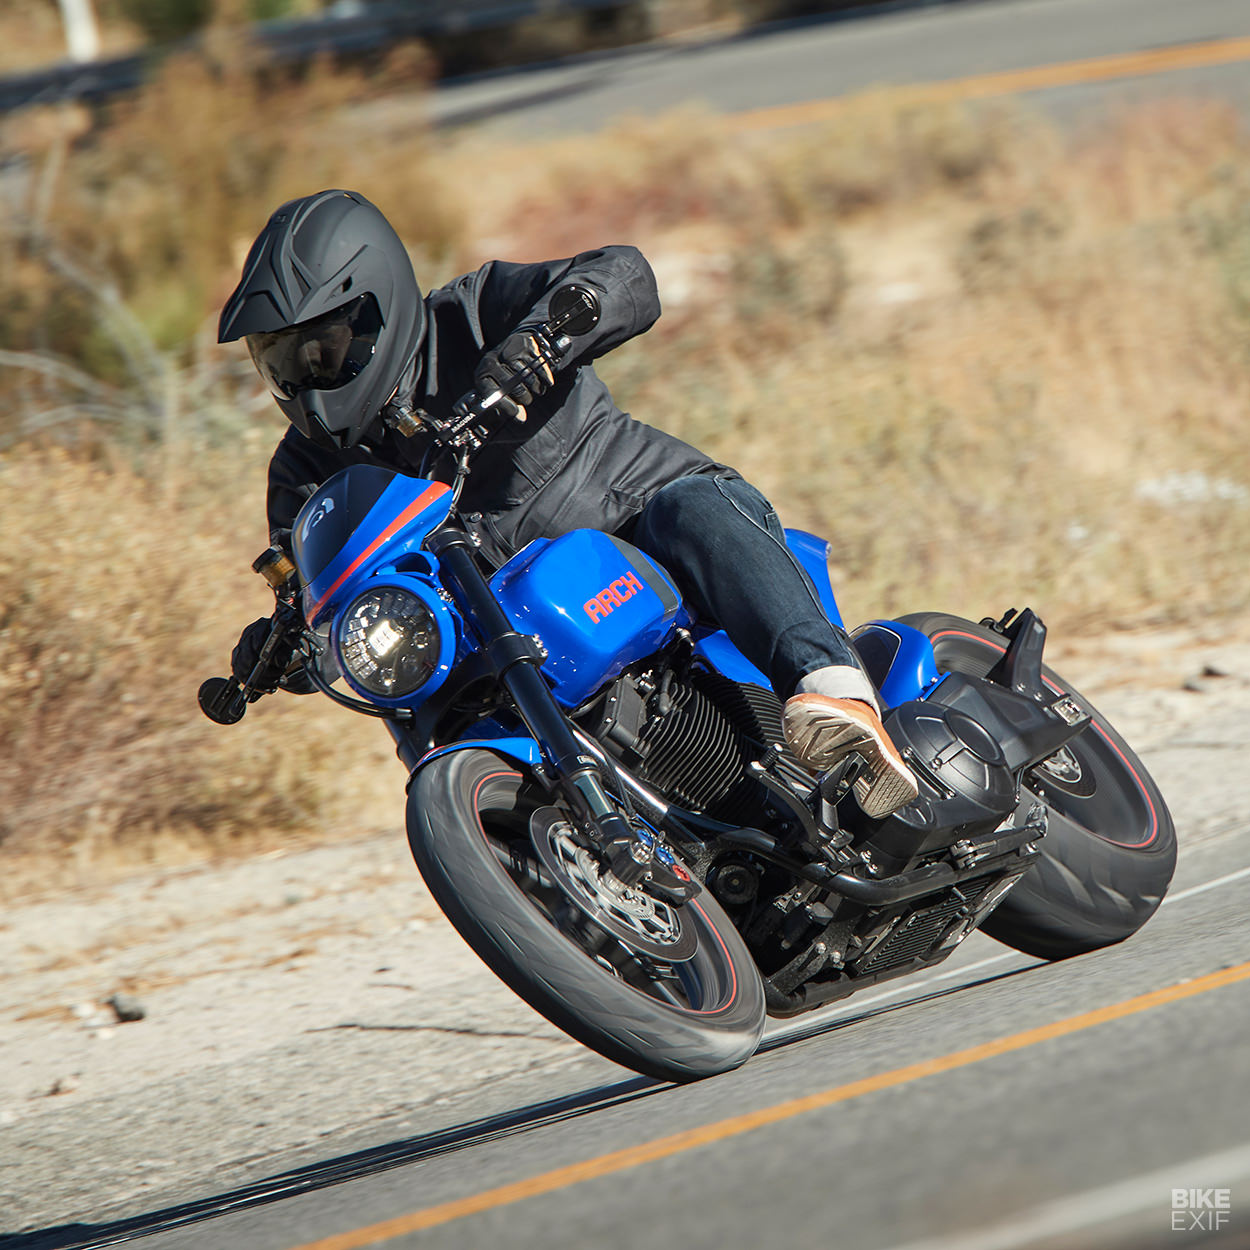 Arch Motorcycle review: riding the KRGT-1, its price and chatting with Keanu Reeves